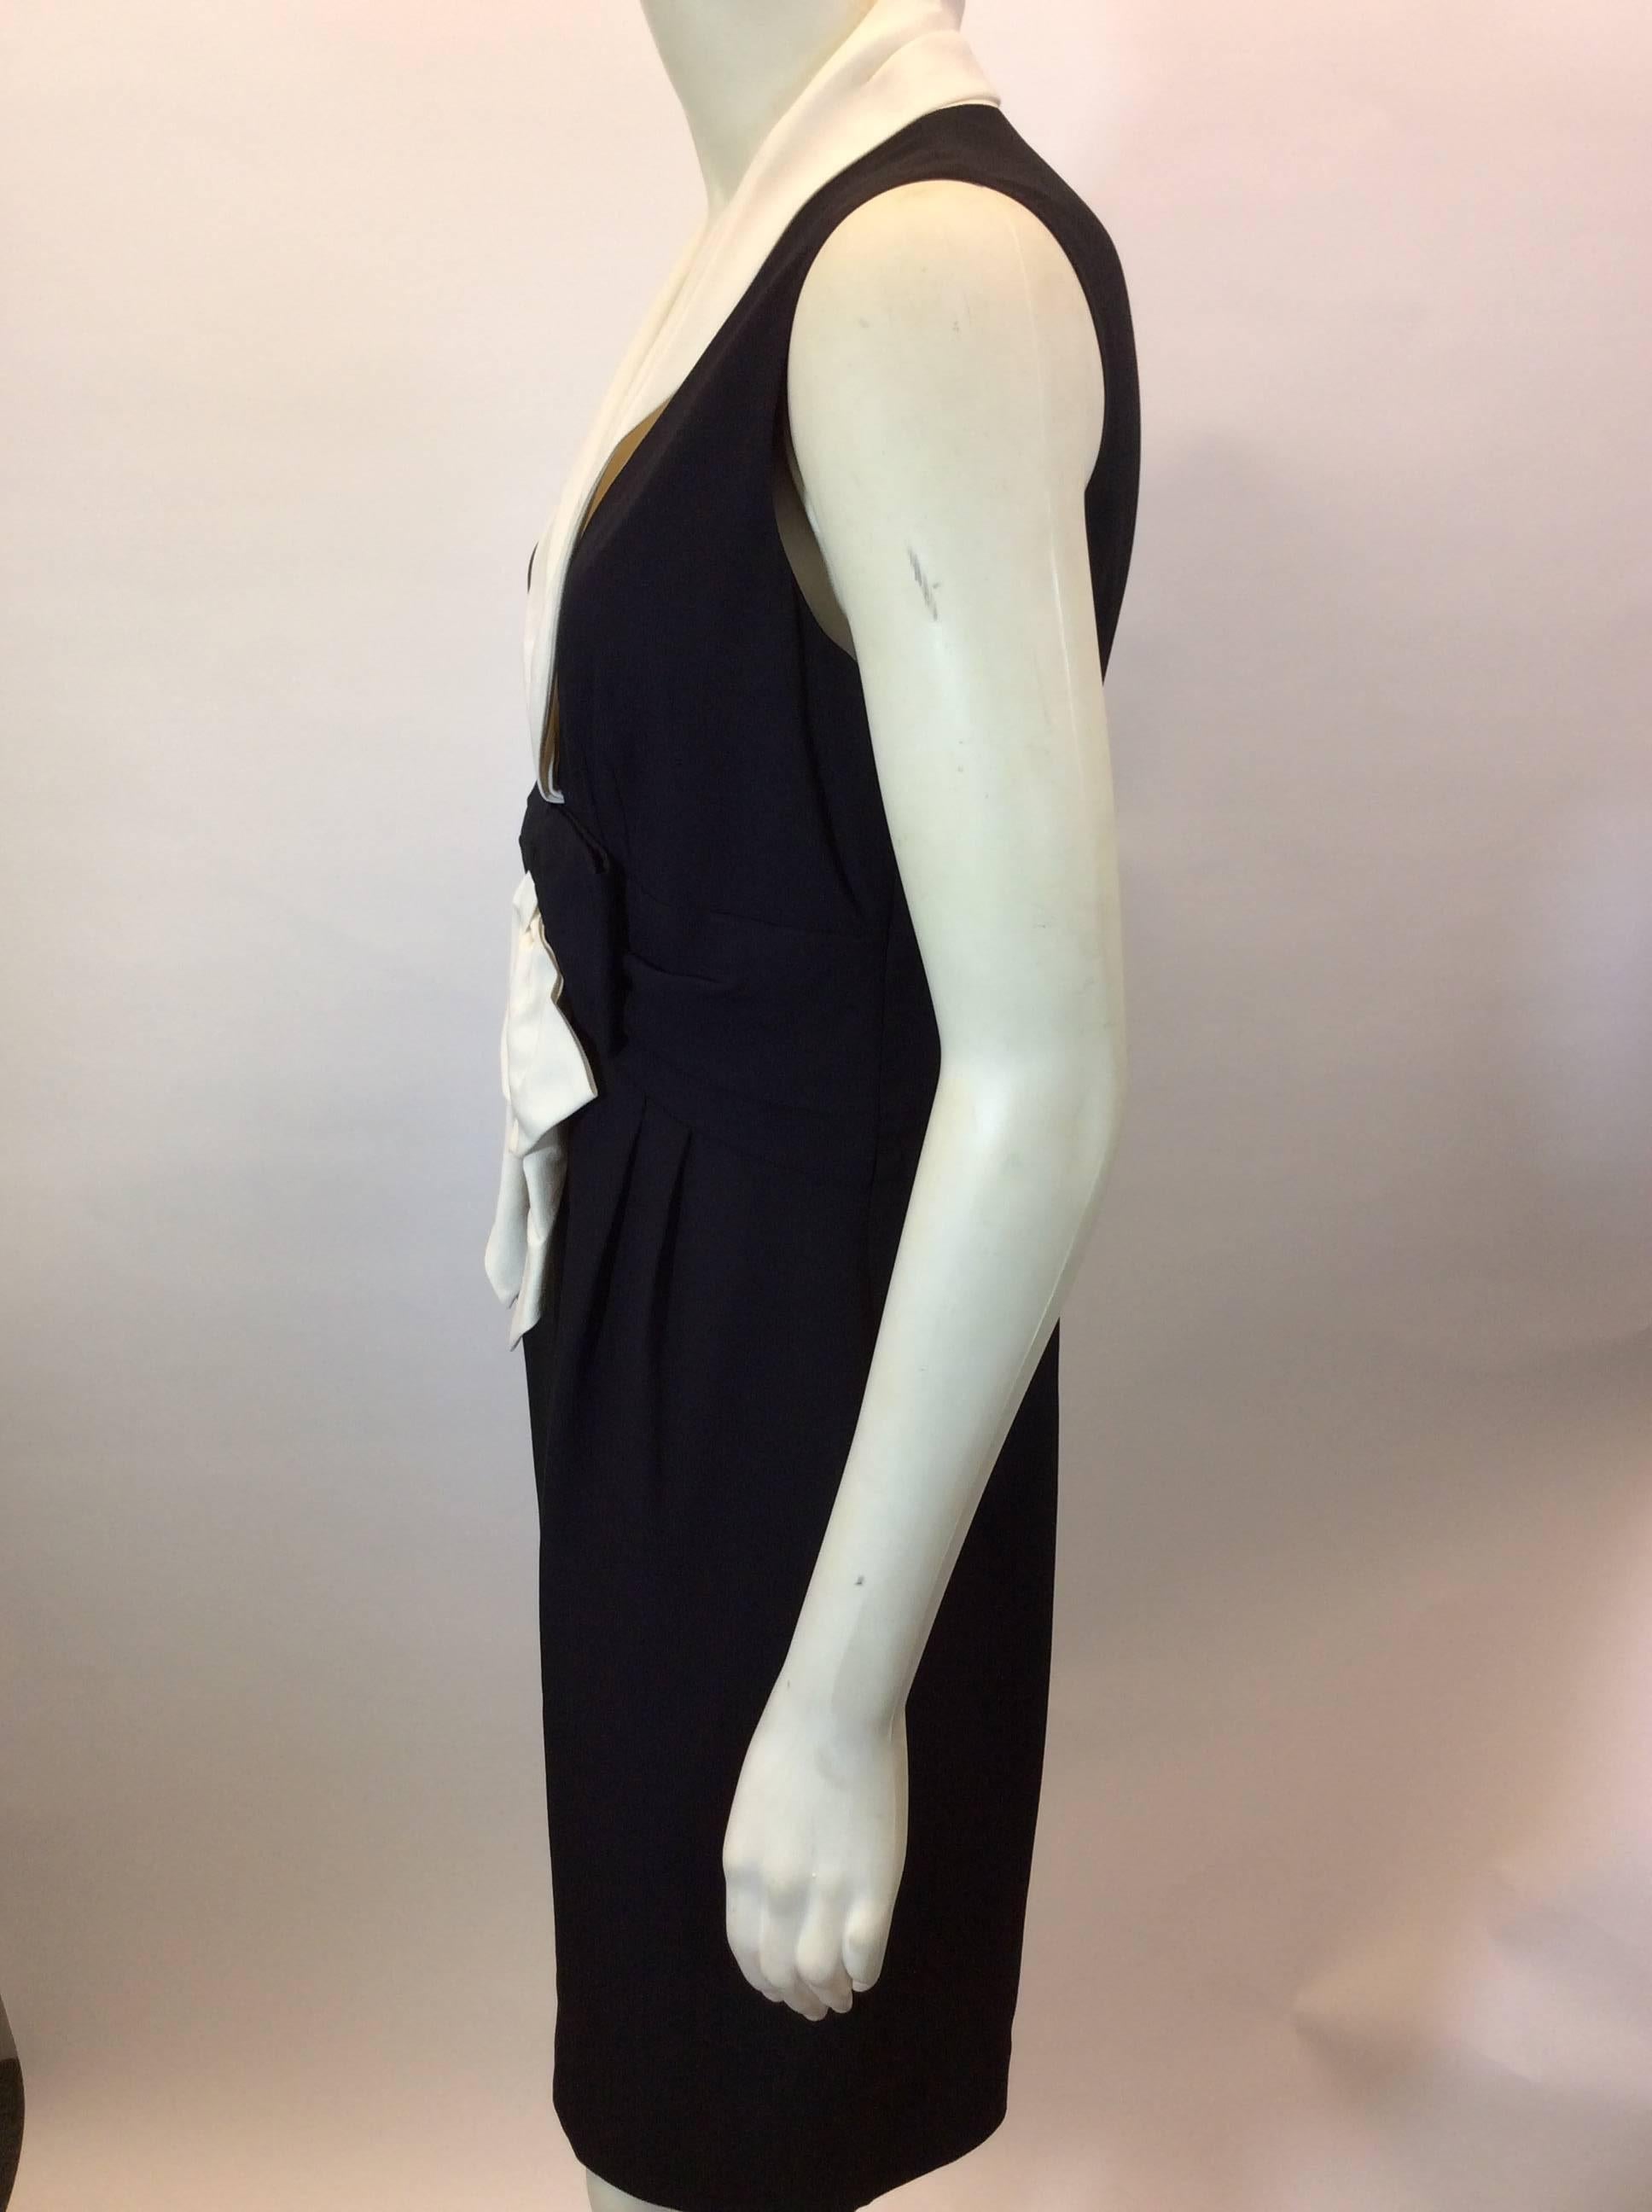 Moschino Black Sheath Dress with White Bow Detail In Excellent Condition For Sale In Narberth, PA